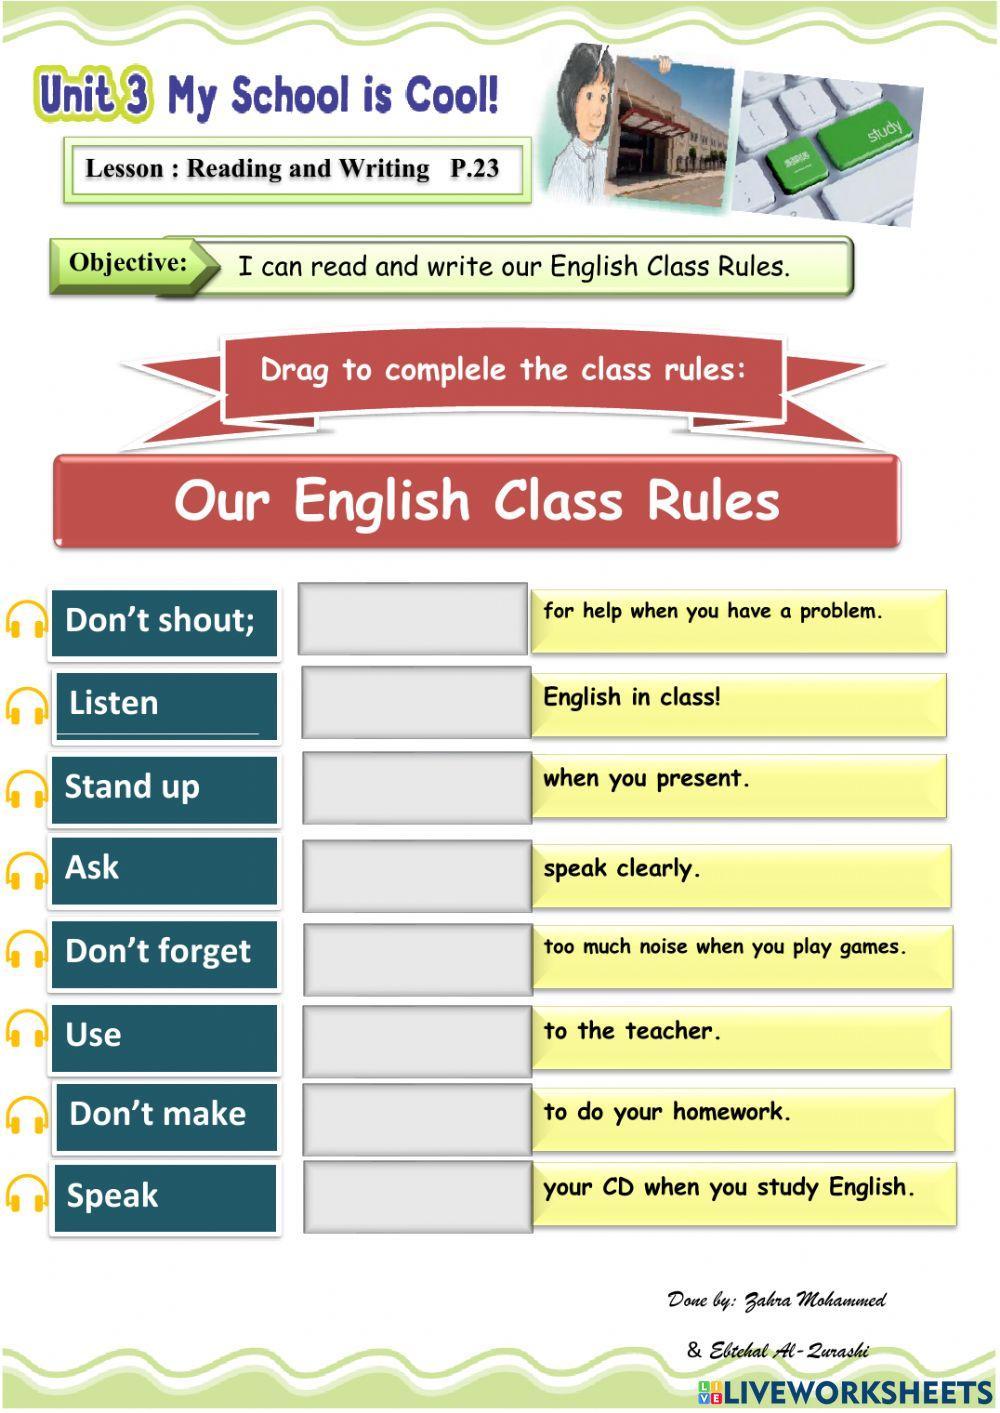 Our rules in English class